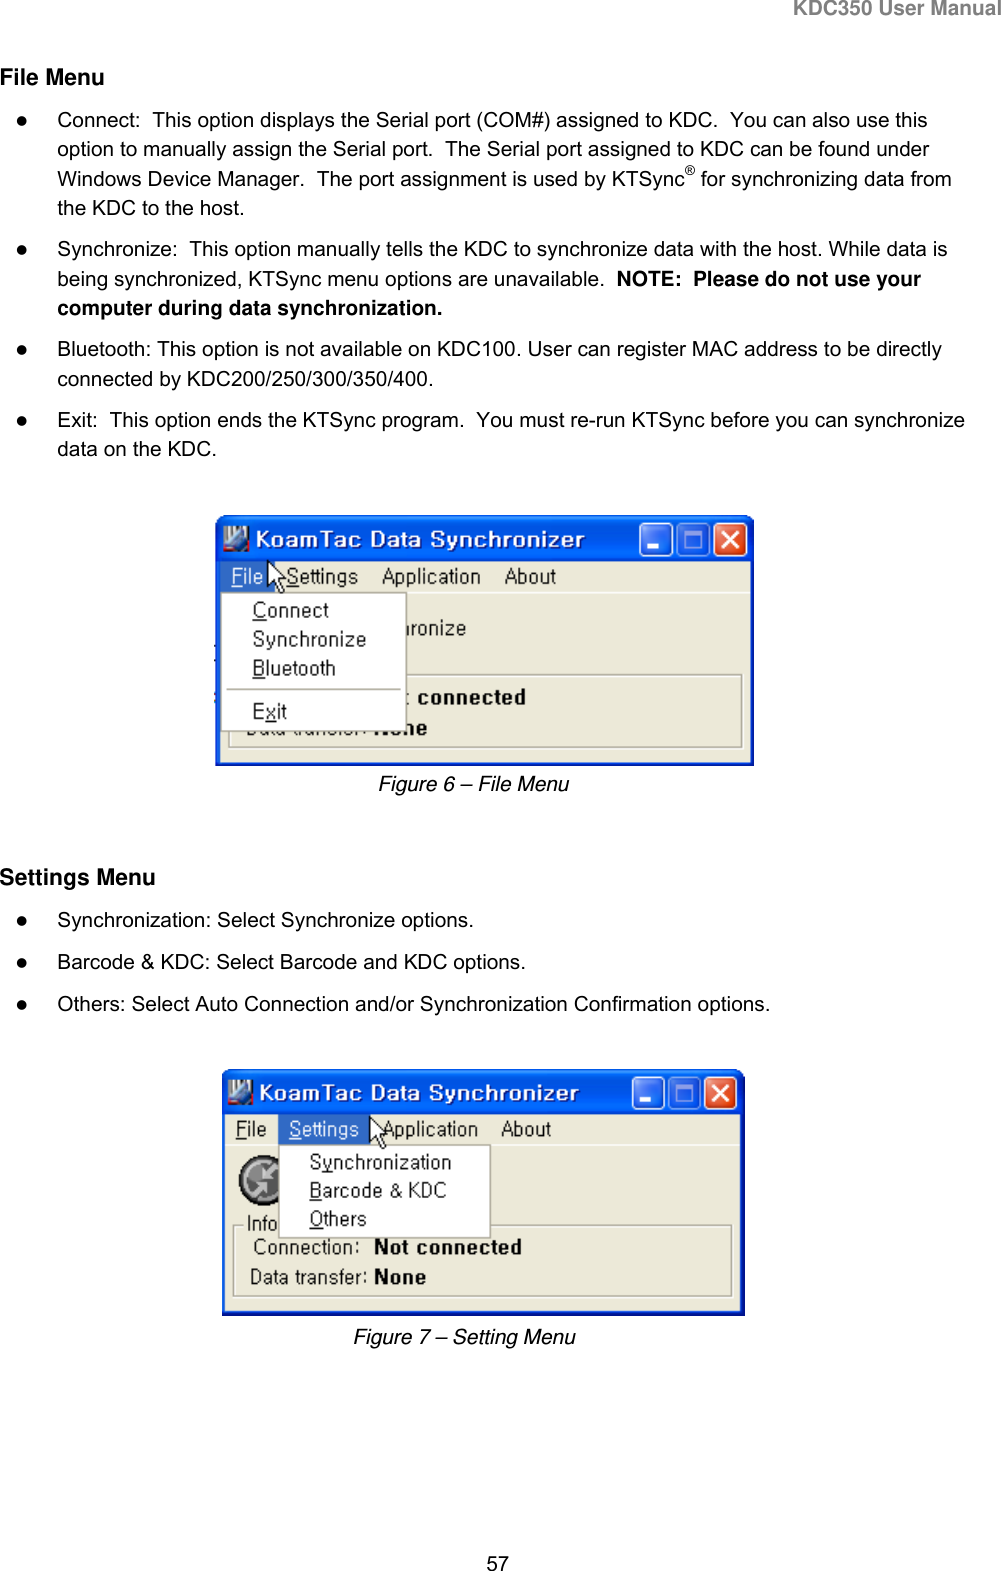 KDC350 User Manual  57  File Menu  Connect:  This option displays the Serial port (COM#) assigned to KDC.  You can also use this option to manually assign the Serial port.  The Serial port assigned to KDC can be found under Windows Device Manager.  The port assignment is used by KTSync® for synchronizing data from the KDC to the host.  Synchronize:  This option manually tells the KDC to synchronize data with the host. While data is being synchronized, KTSync menu options are unavailable.  NOTE:  Please do not use your computer during data synchronization.    Bluetooth: This option is not available on KDC100. User can register MAC address to be directly connected by KDC200/250/300/350/400.  Exit:  This option ends the KTSync program.  You must re-run KTSync before you can synchronize data on the KDC.       Settings Menu  Synchronization: Select Synchronize options.  Barcode &amp; KDC: Select Barcode and KDC options.  Others: Select Auto Connection and/or Synchronization Confirmation options.     Figure 7 – Setting Menu Figure 6 – File Menu